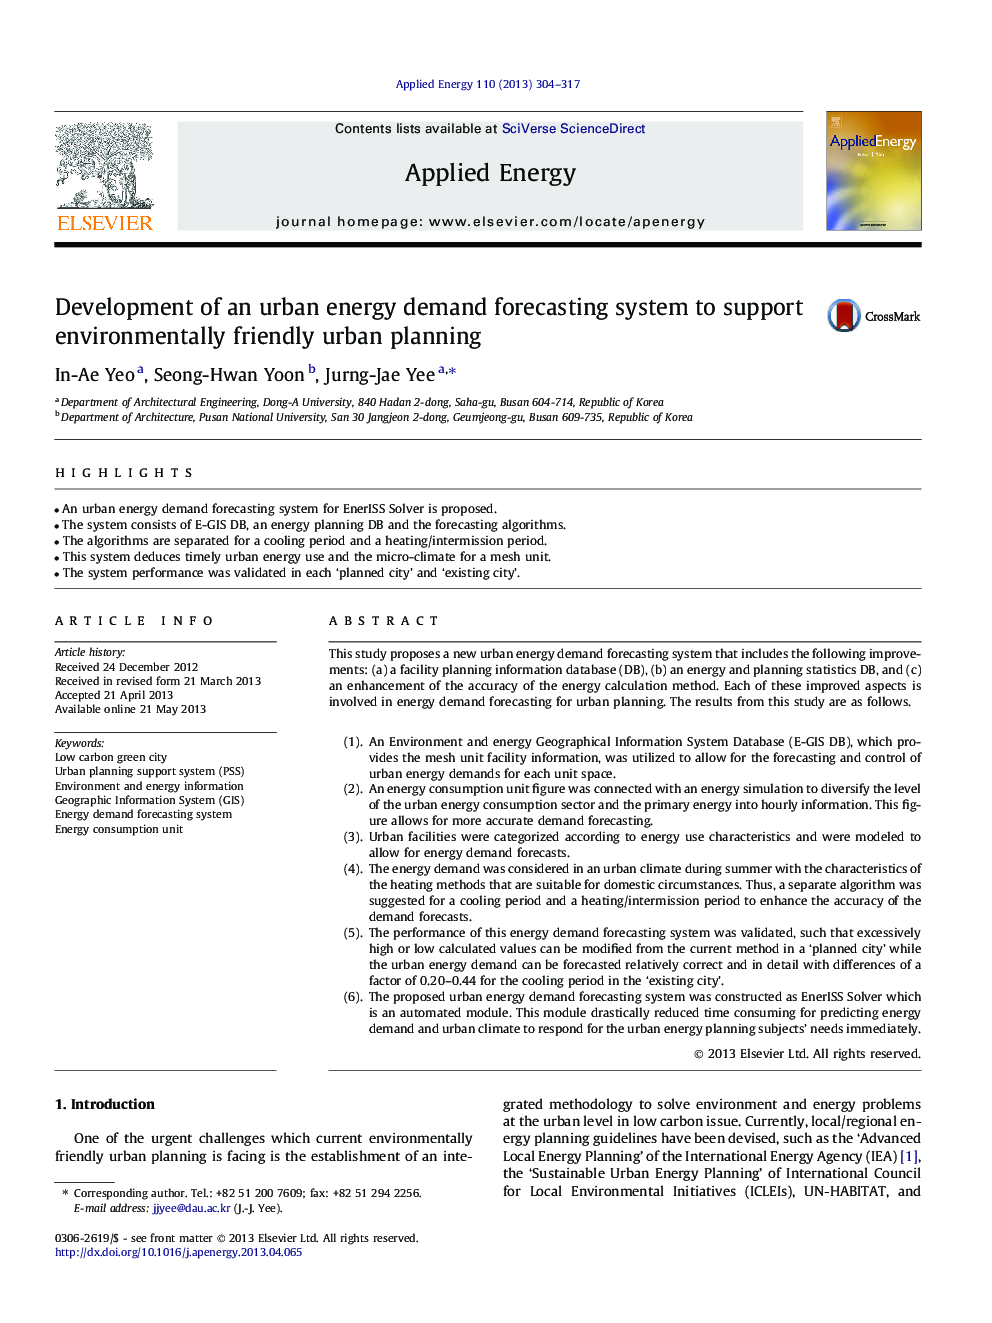 Development of an urban energy demand forecasting system to support environmentally friendly urban planning